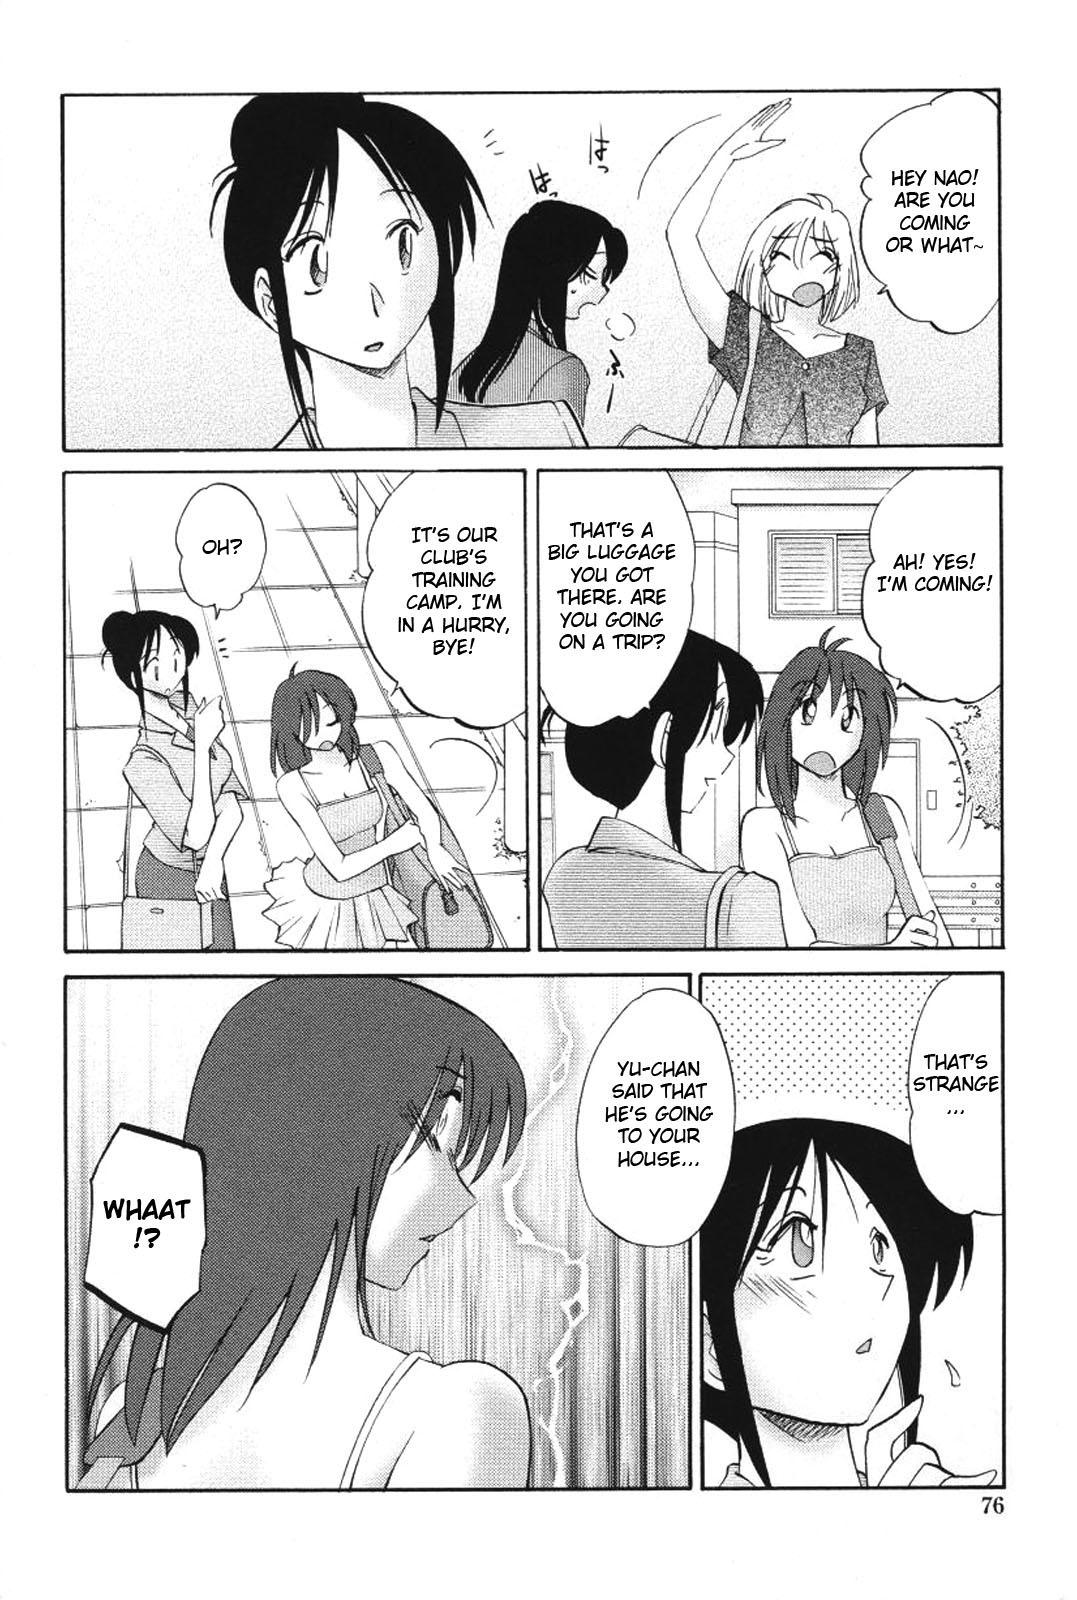 My Sister is My Wife Chapter 12 (English) Translated by Fated Cricle 5